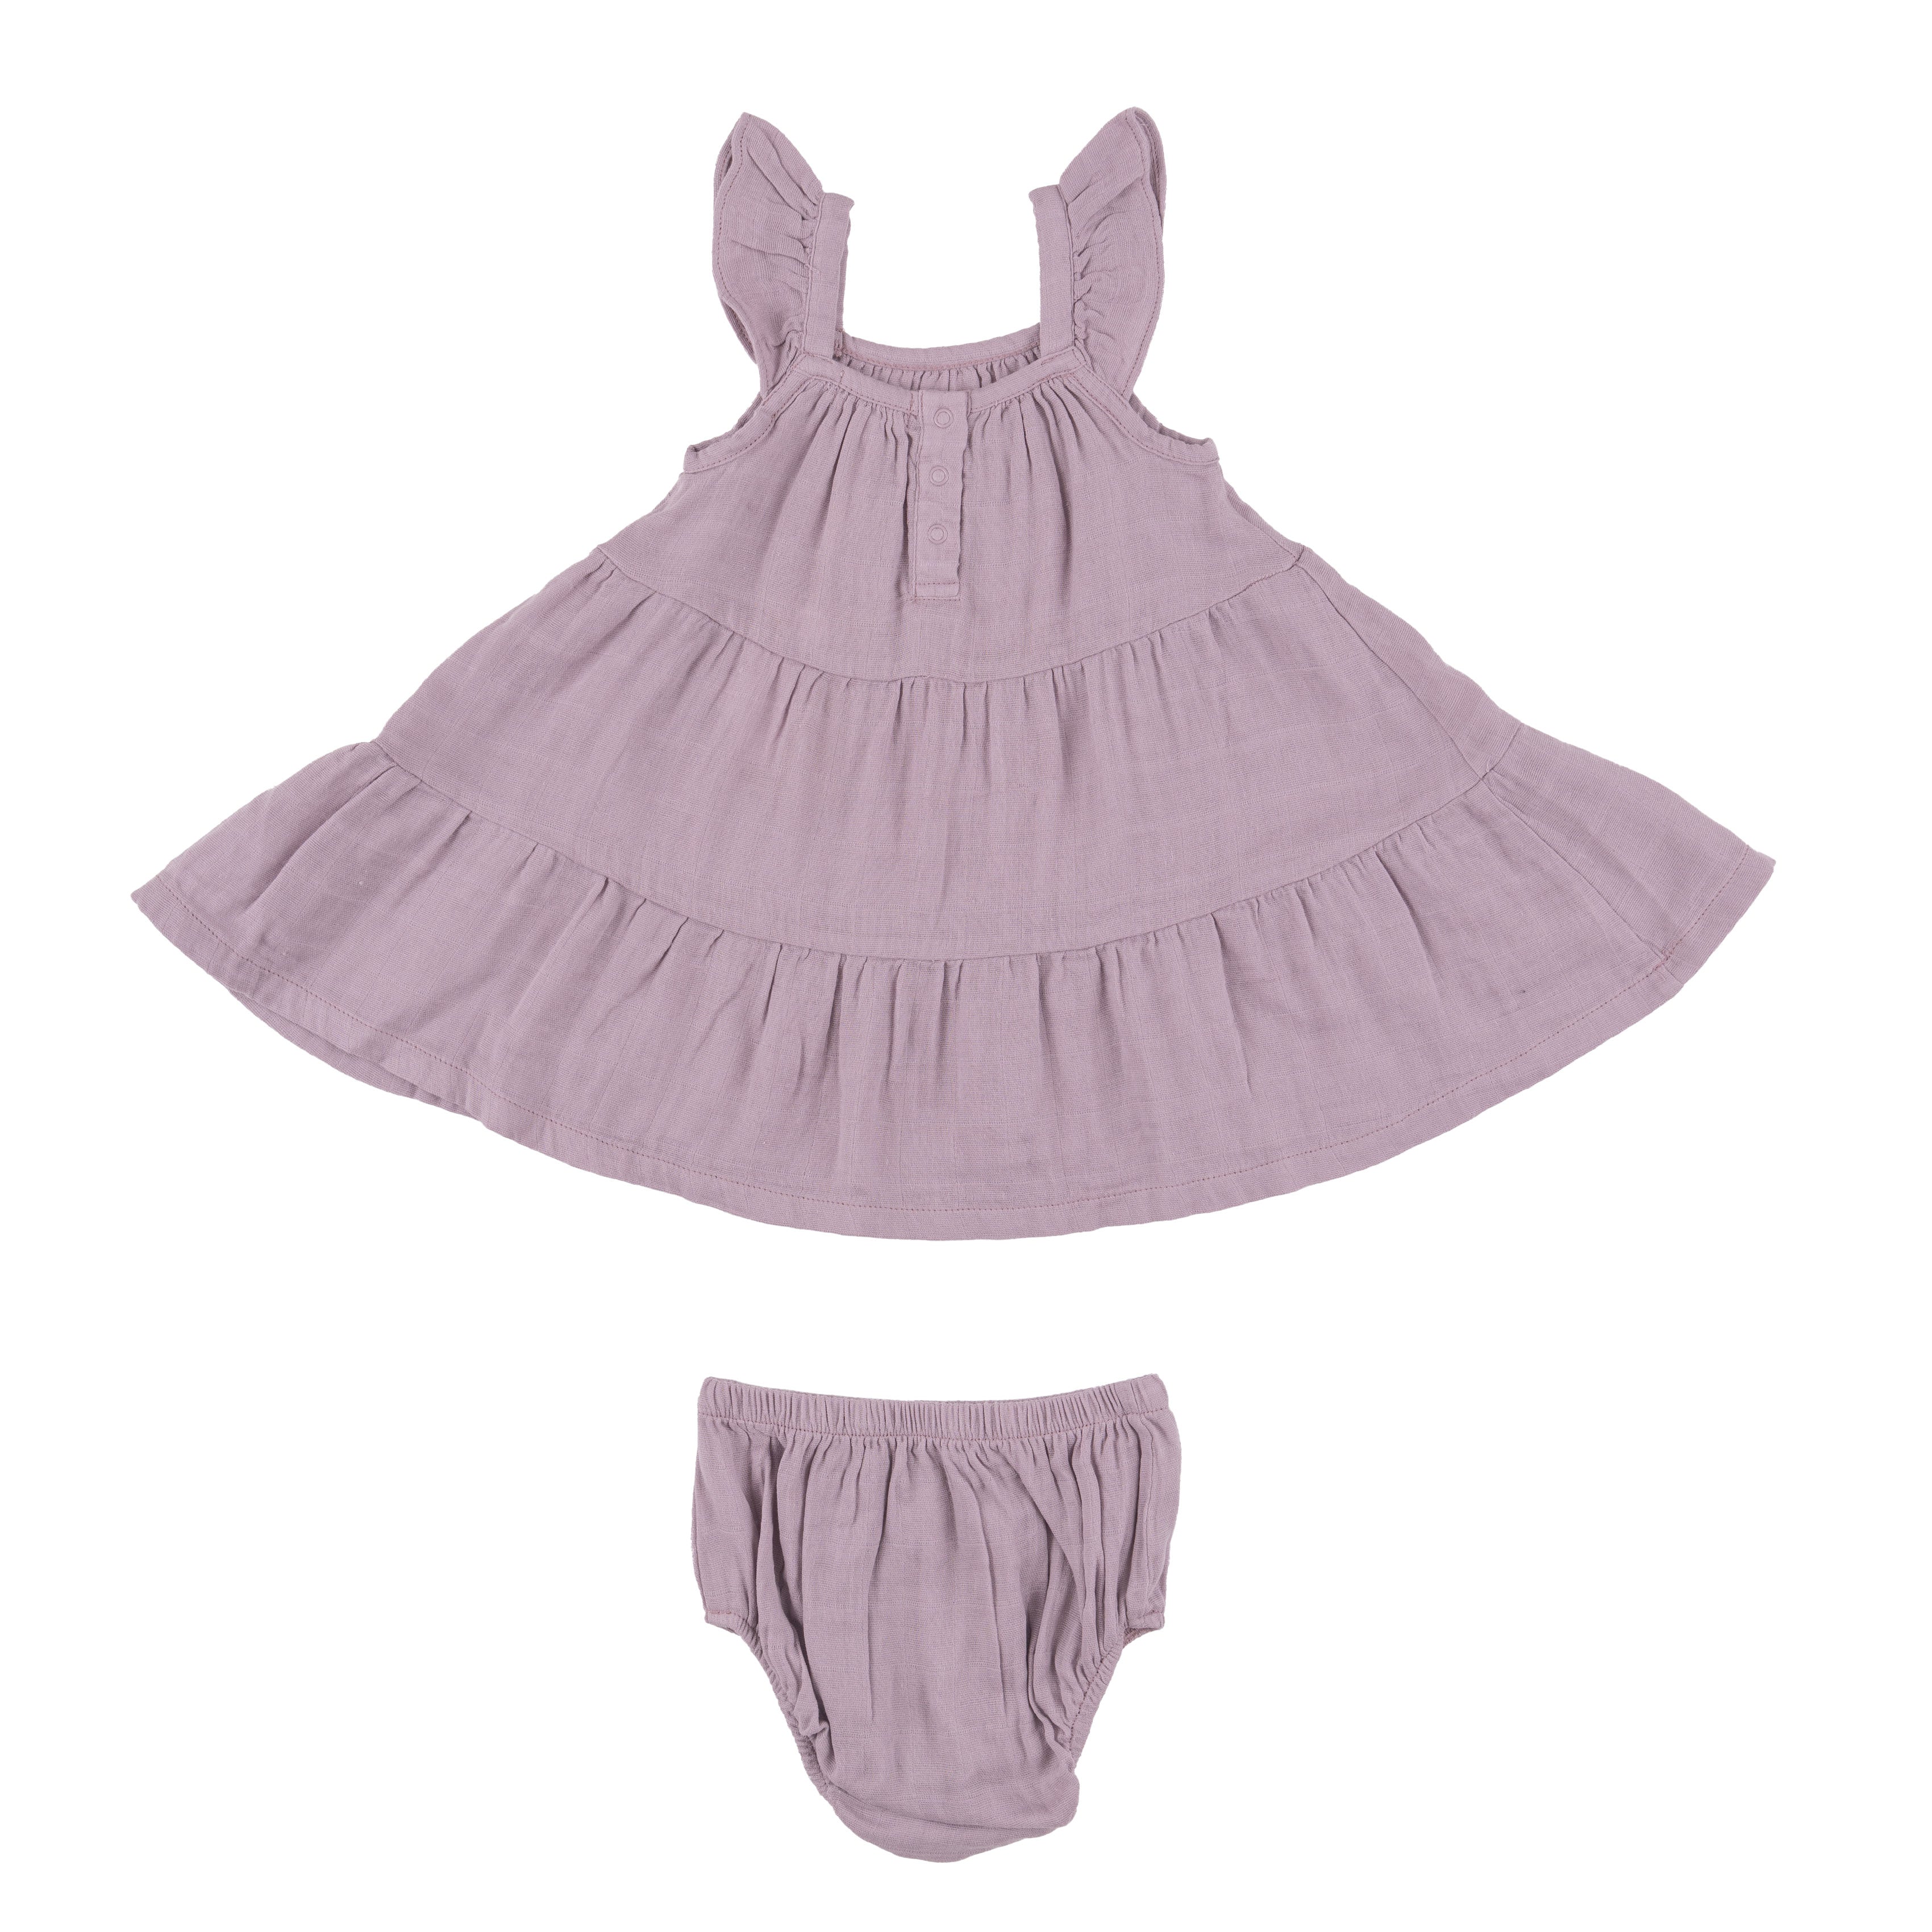 Twirly Sundress & Diaper Cover - Dusty Lavender Solid Muslin